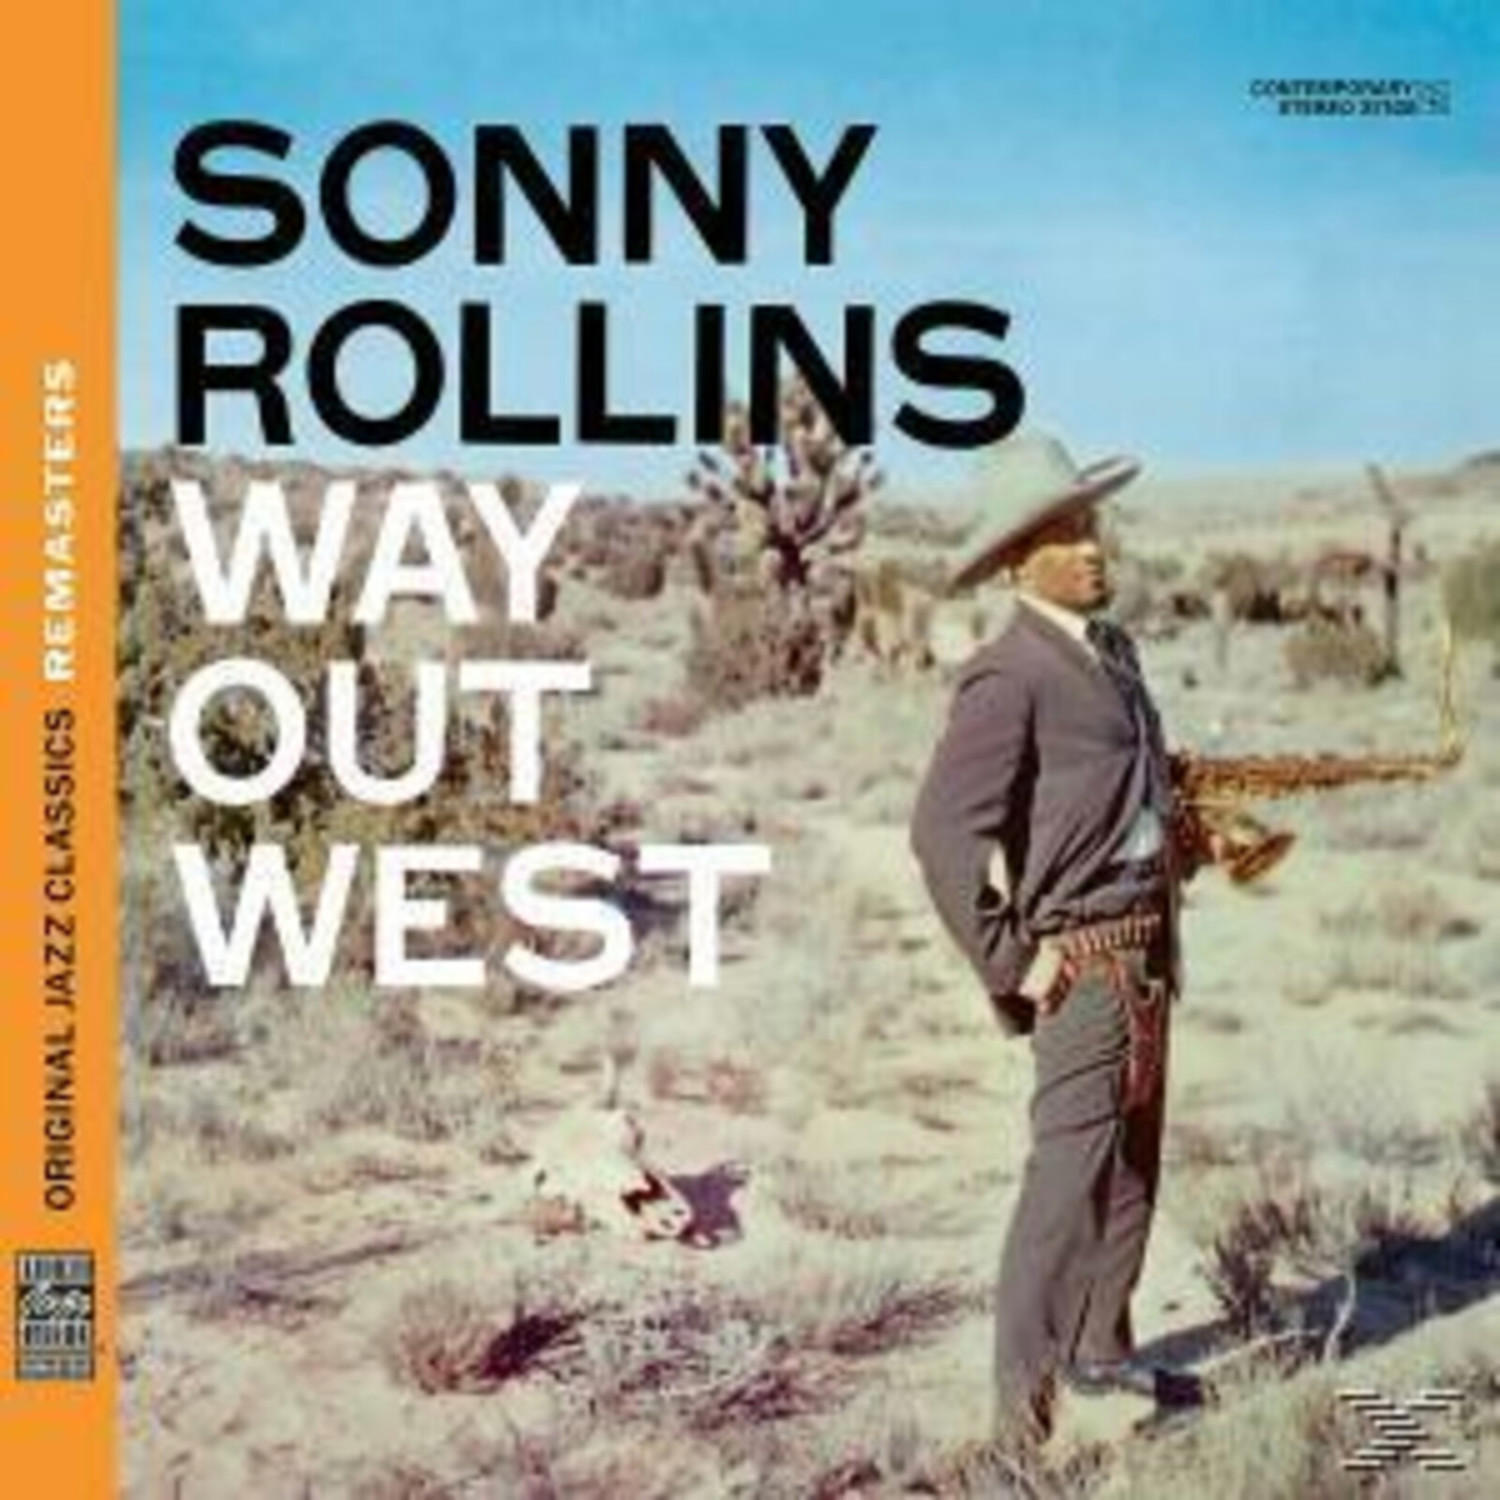 Sonny Rollins - Way Out West (Ojc Remasters) (CD)